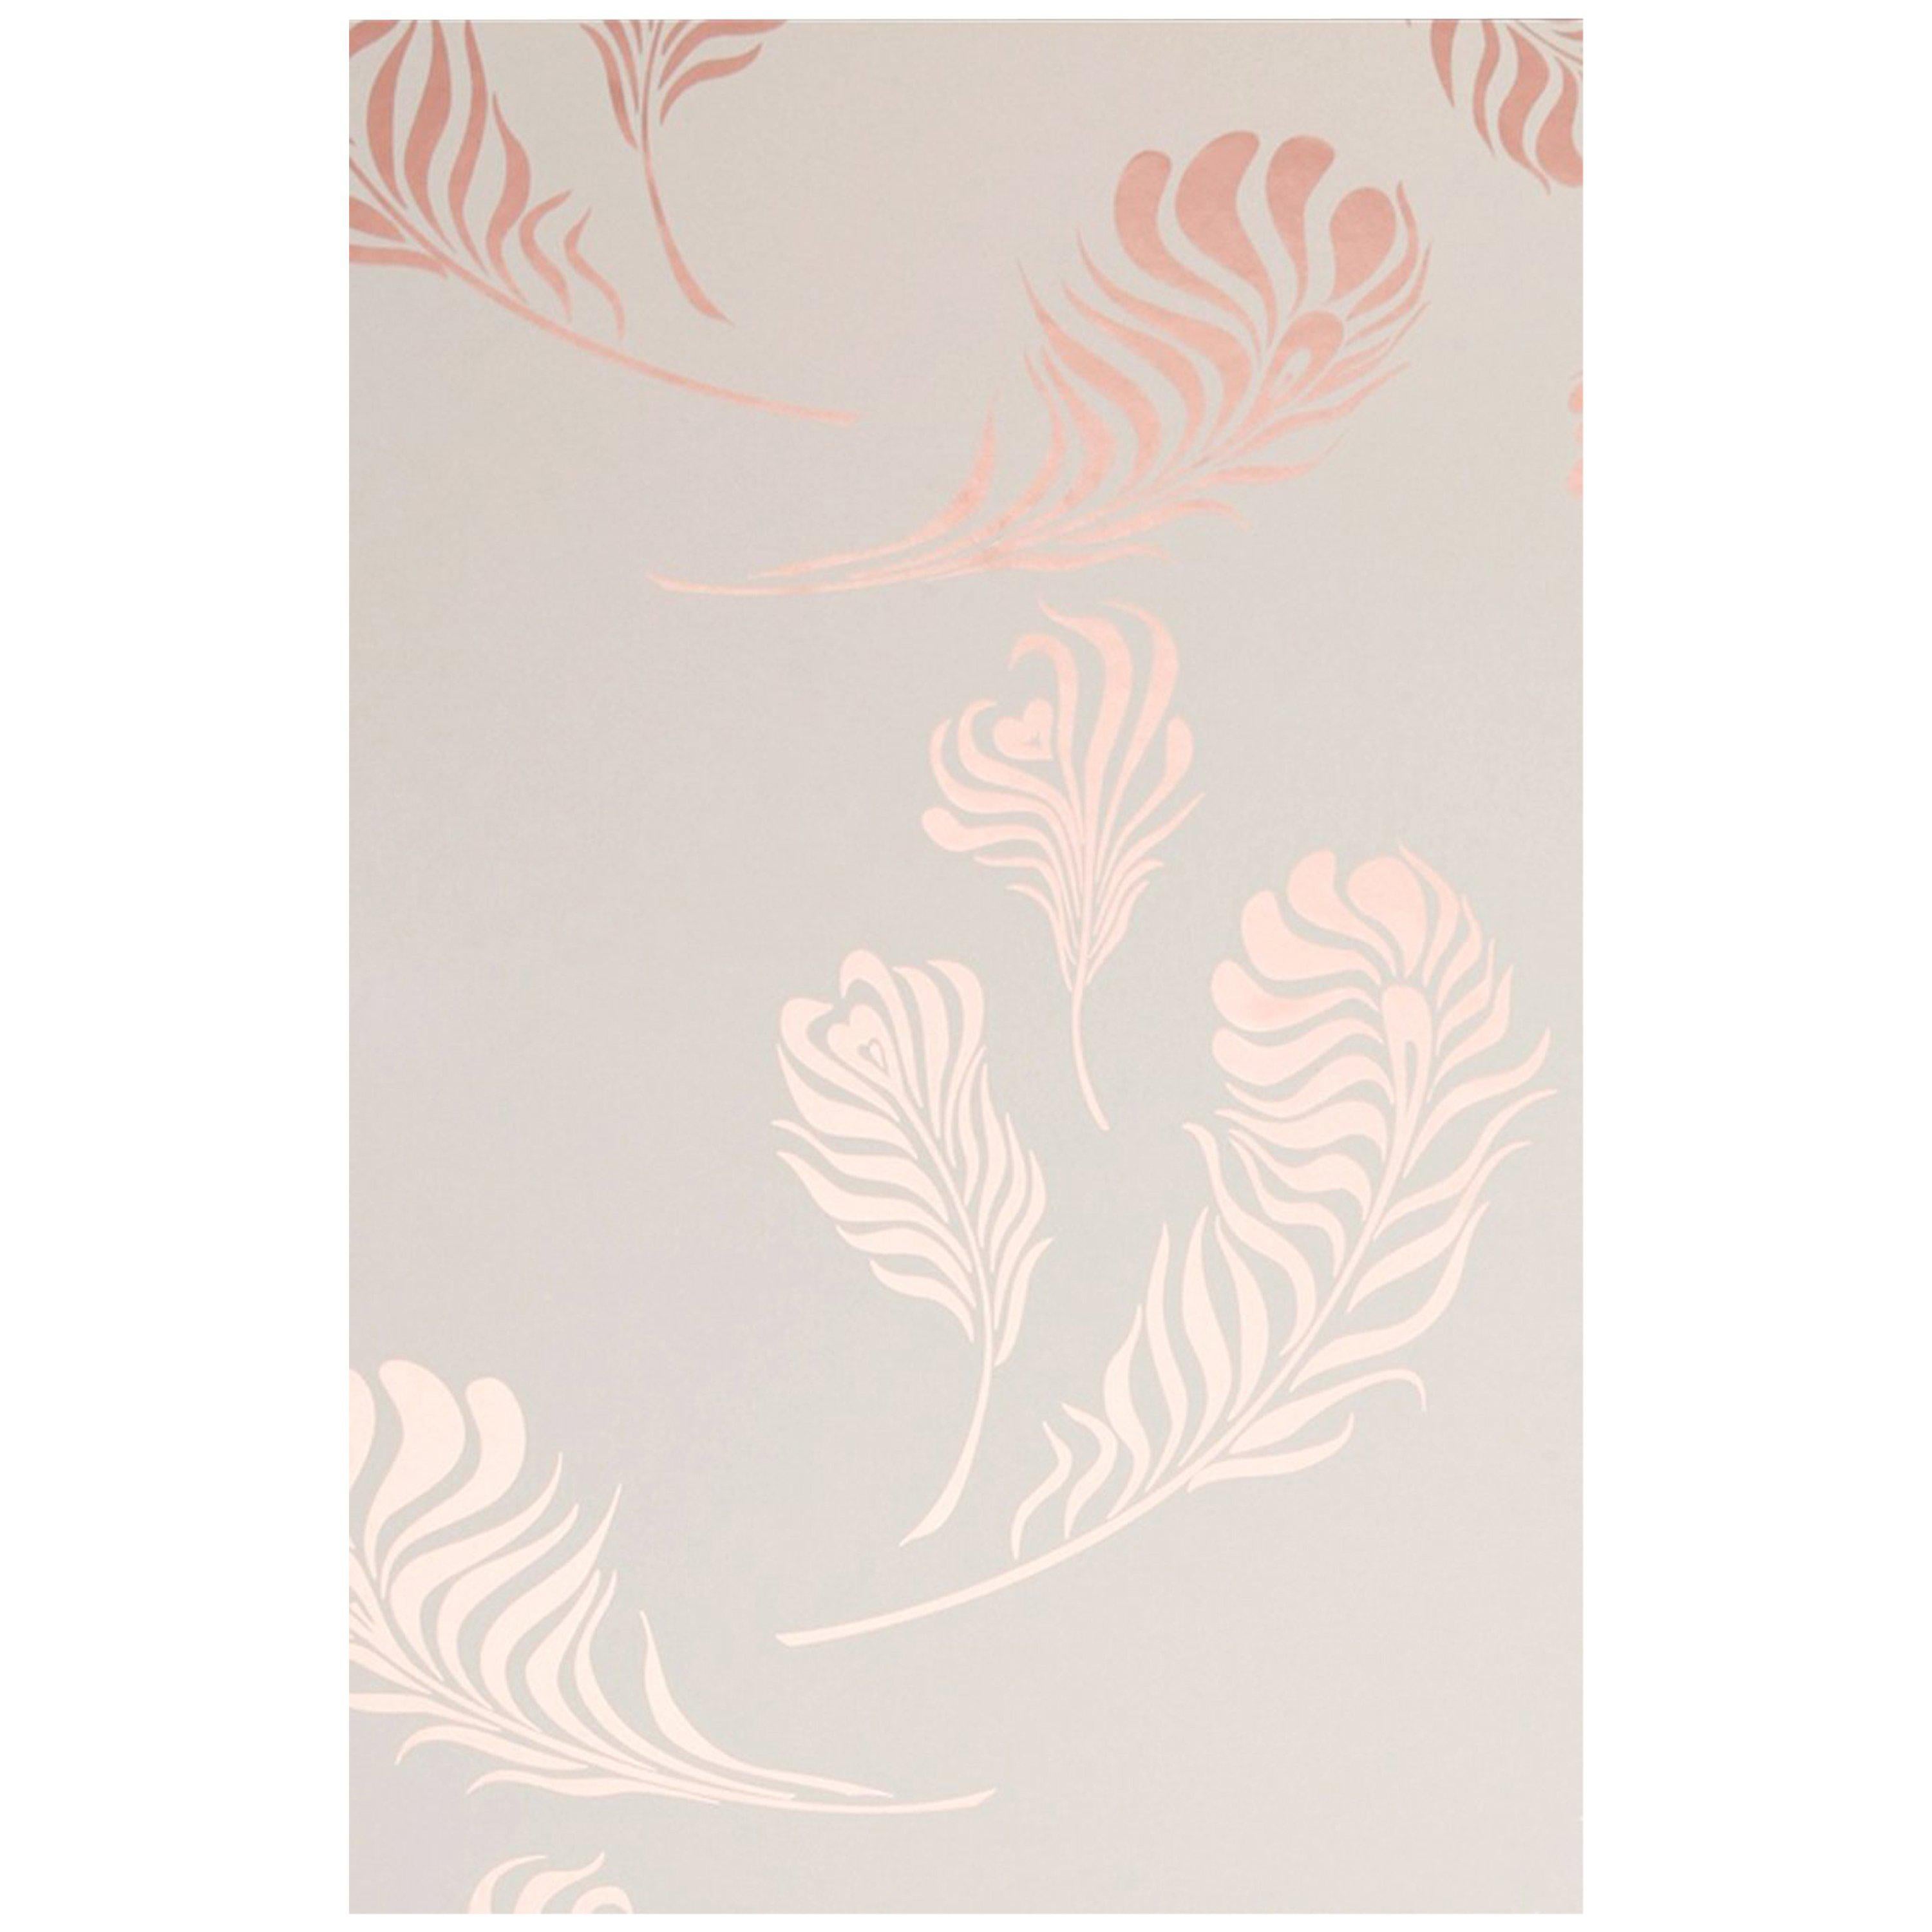 American Plume Screen Printed Wallpaper in Metallic Copper on Snow For Sale